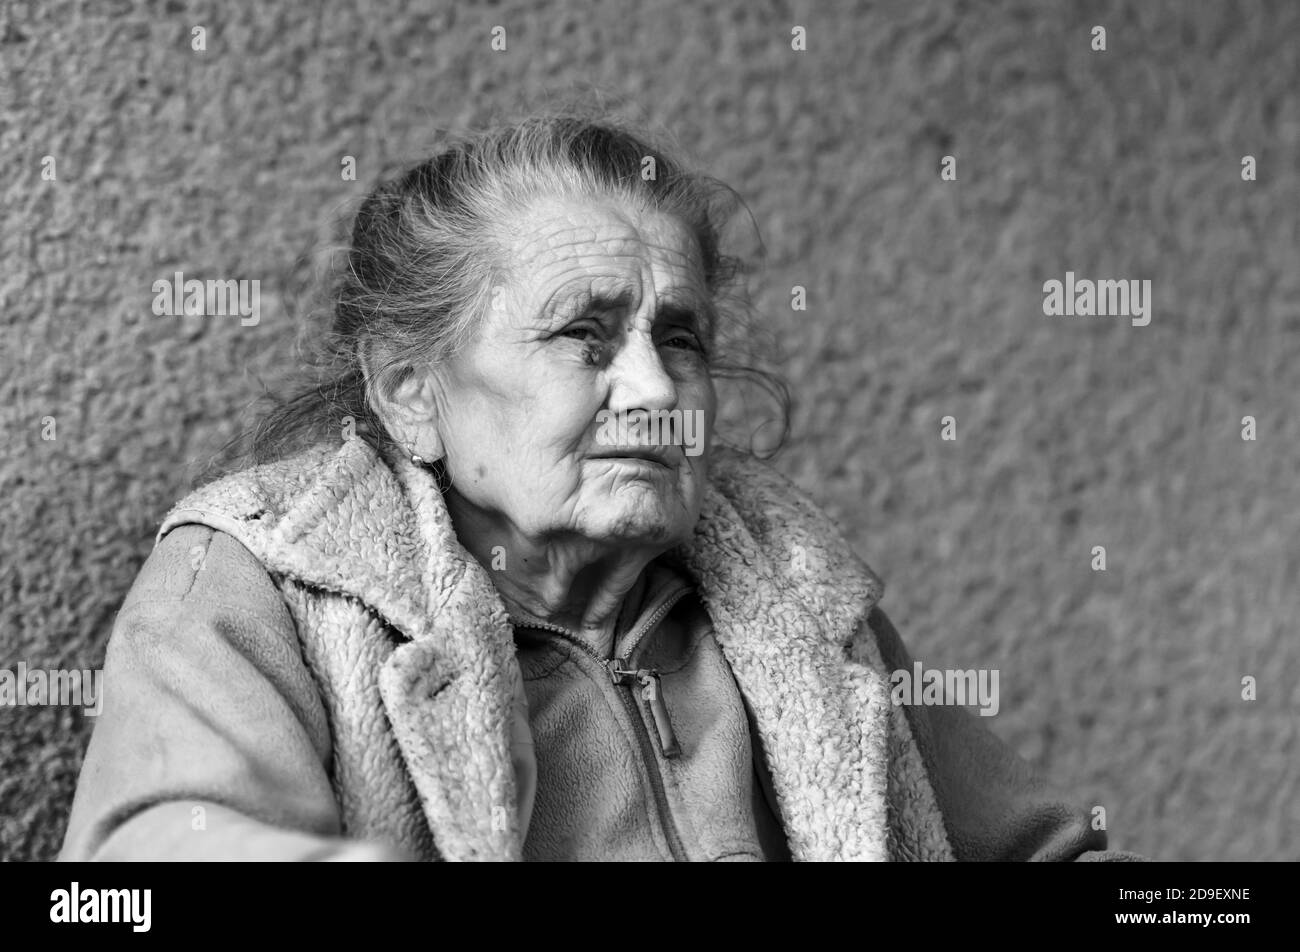 Old Age And Lifestyle Concept Black And White Portrait Of A Very Old